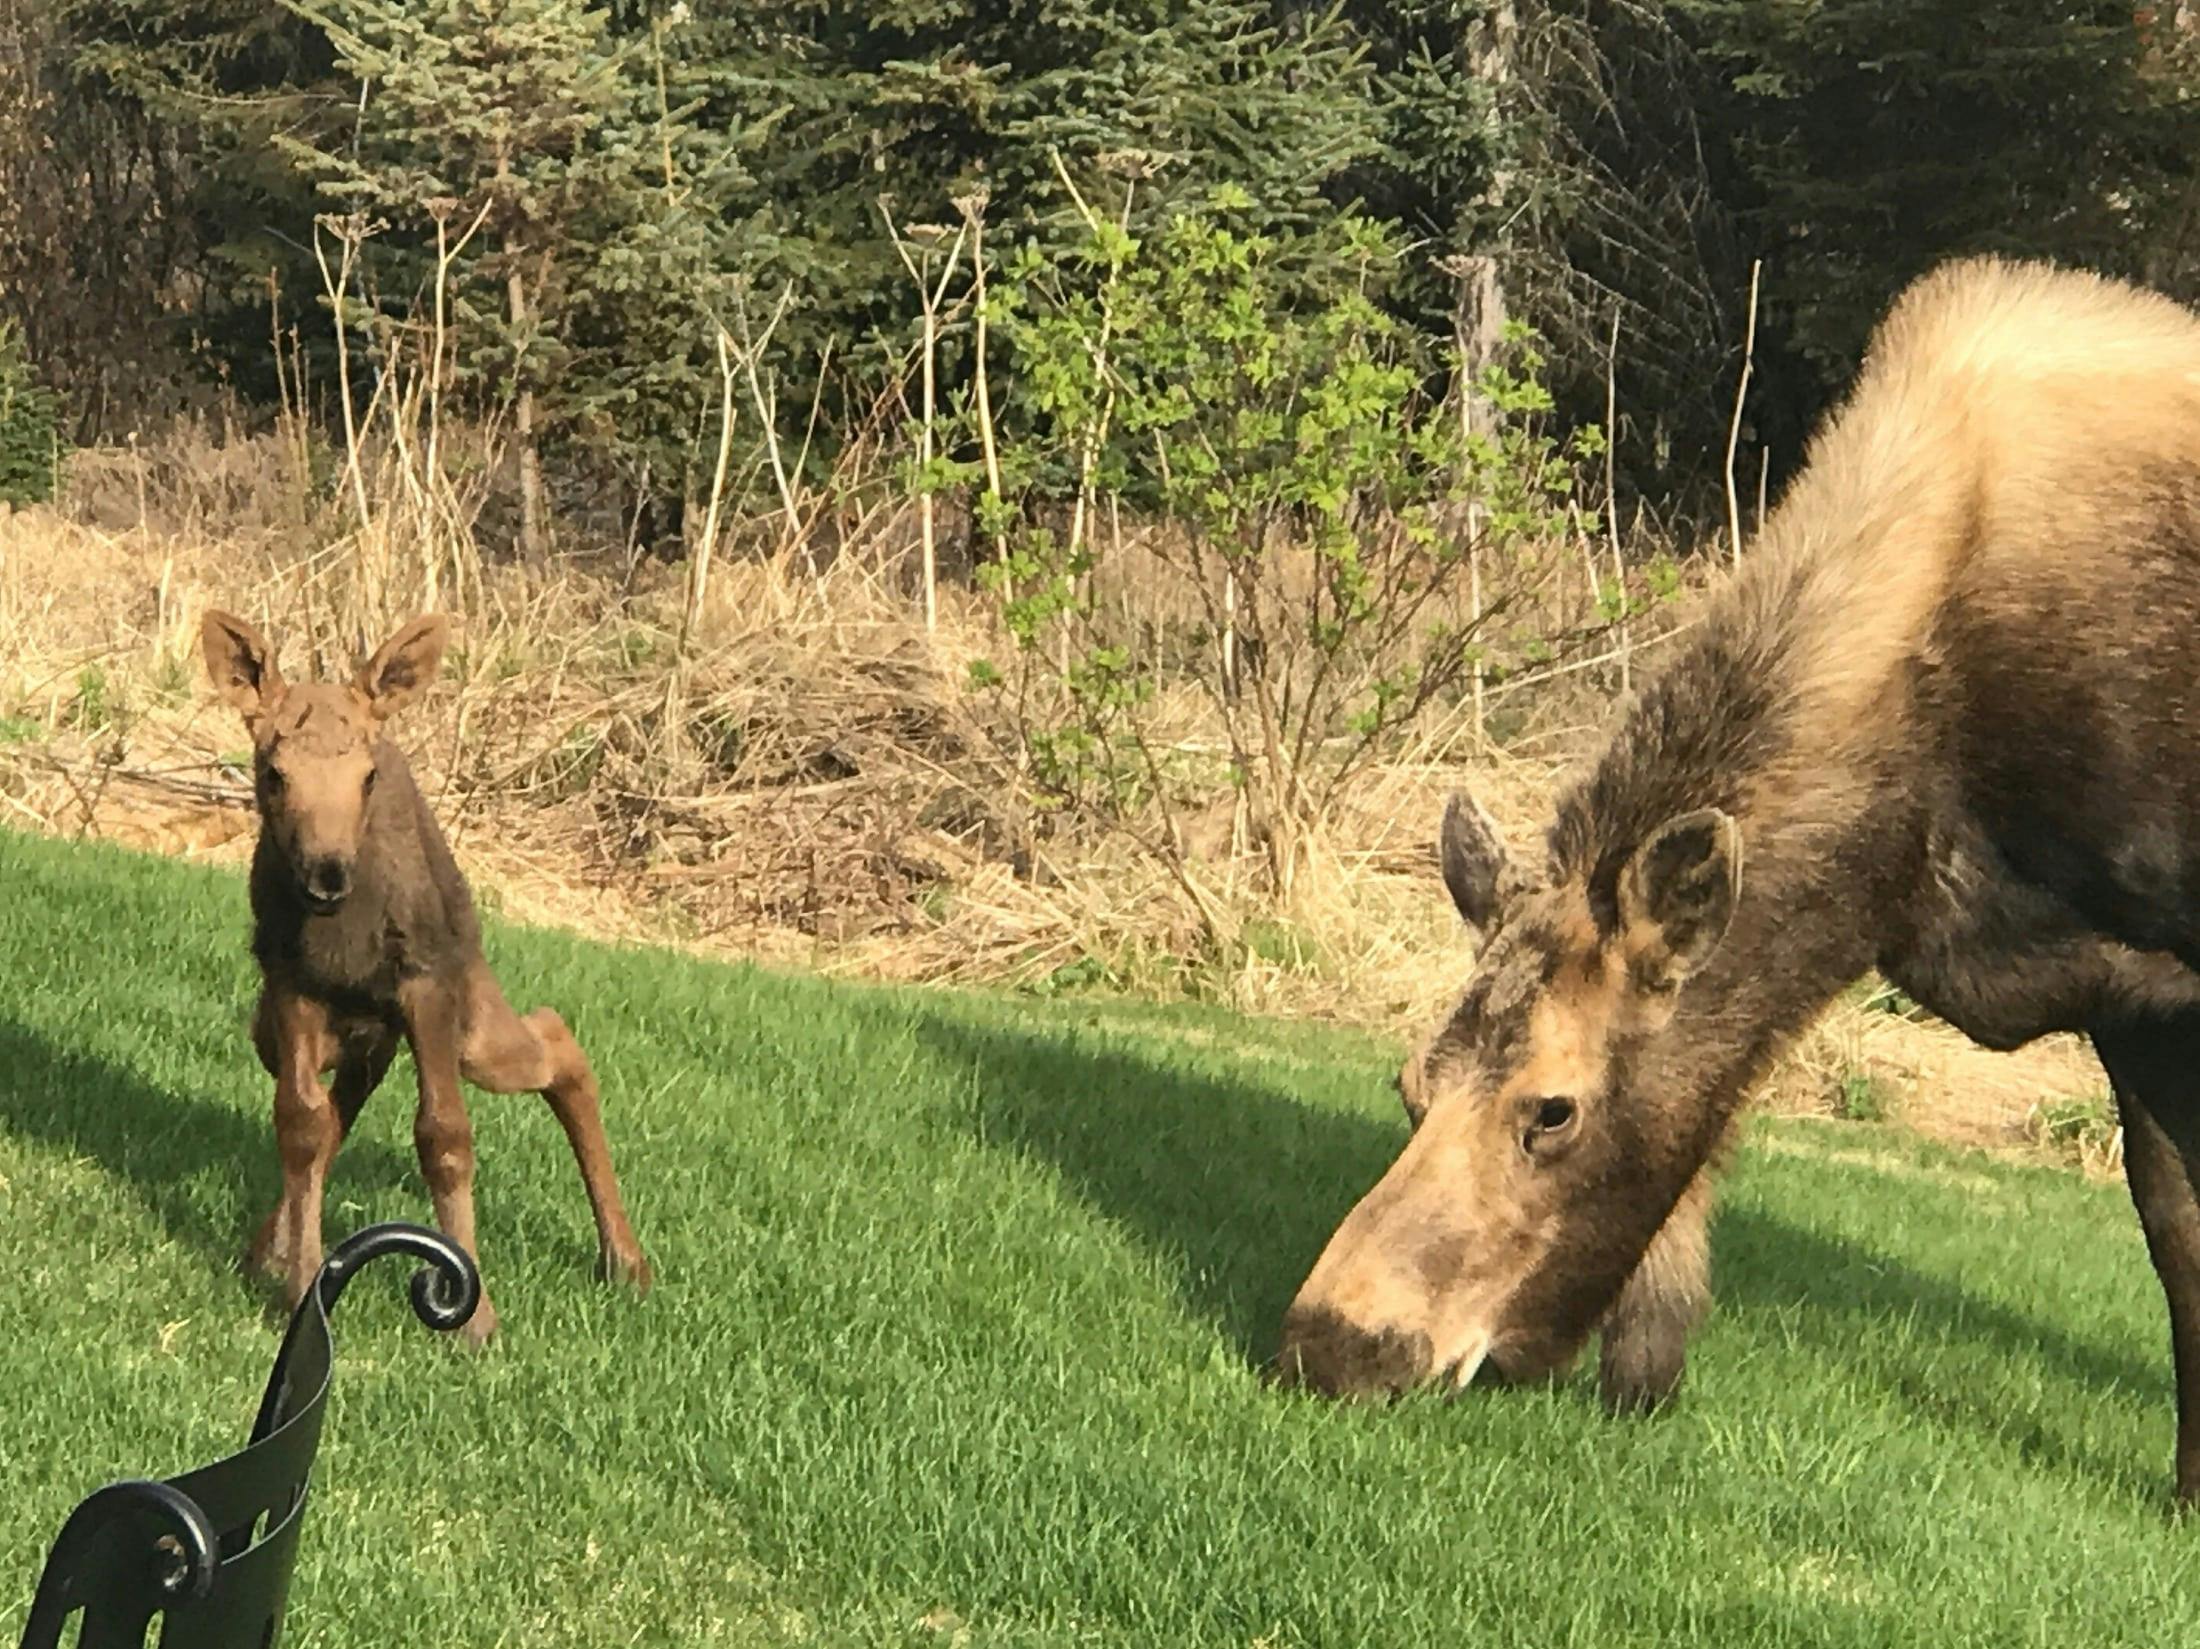 Mama moose with baby moose in backyard of inn eating grass